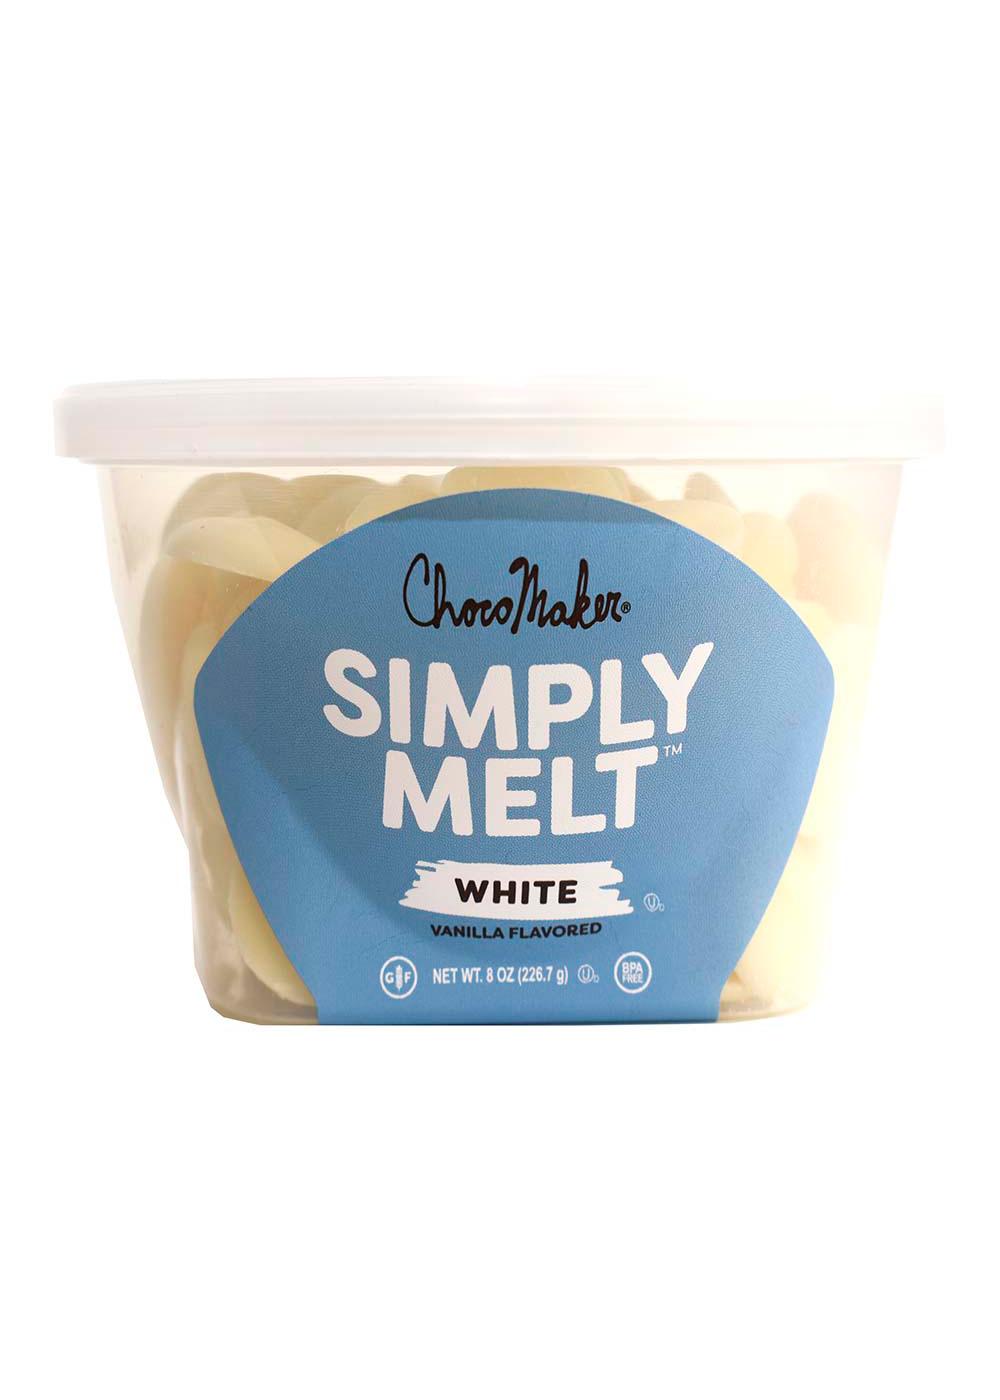 ChocoMaker Simply Melt White Chocolate Candy Wafers; image 1 of 5